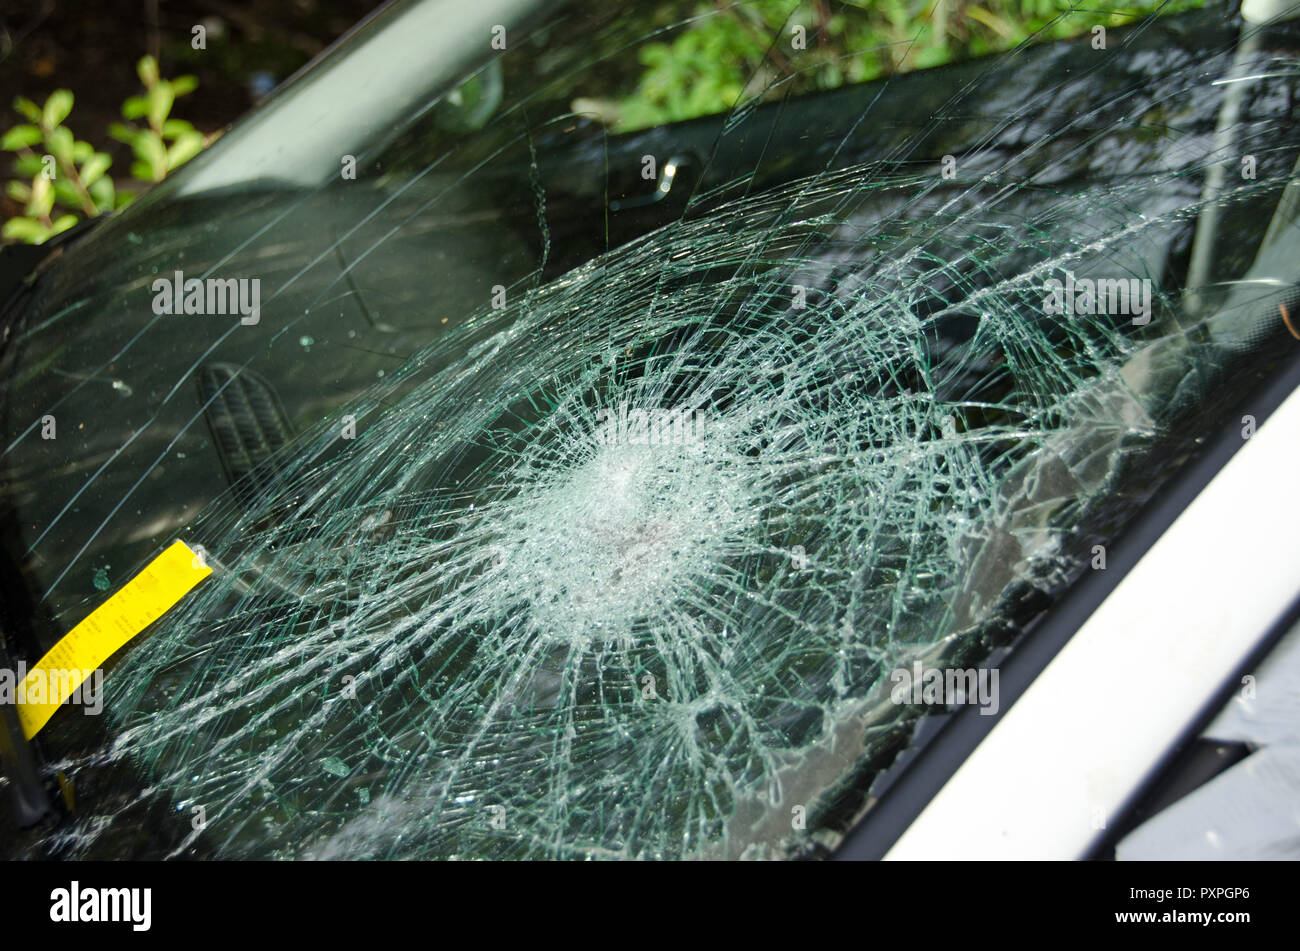 Cracked windshield on car with a fine Stock Photo